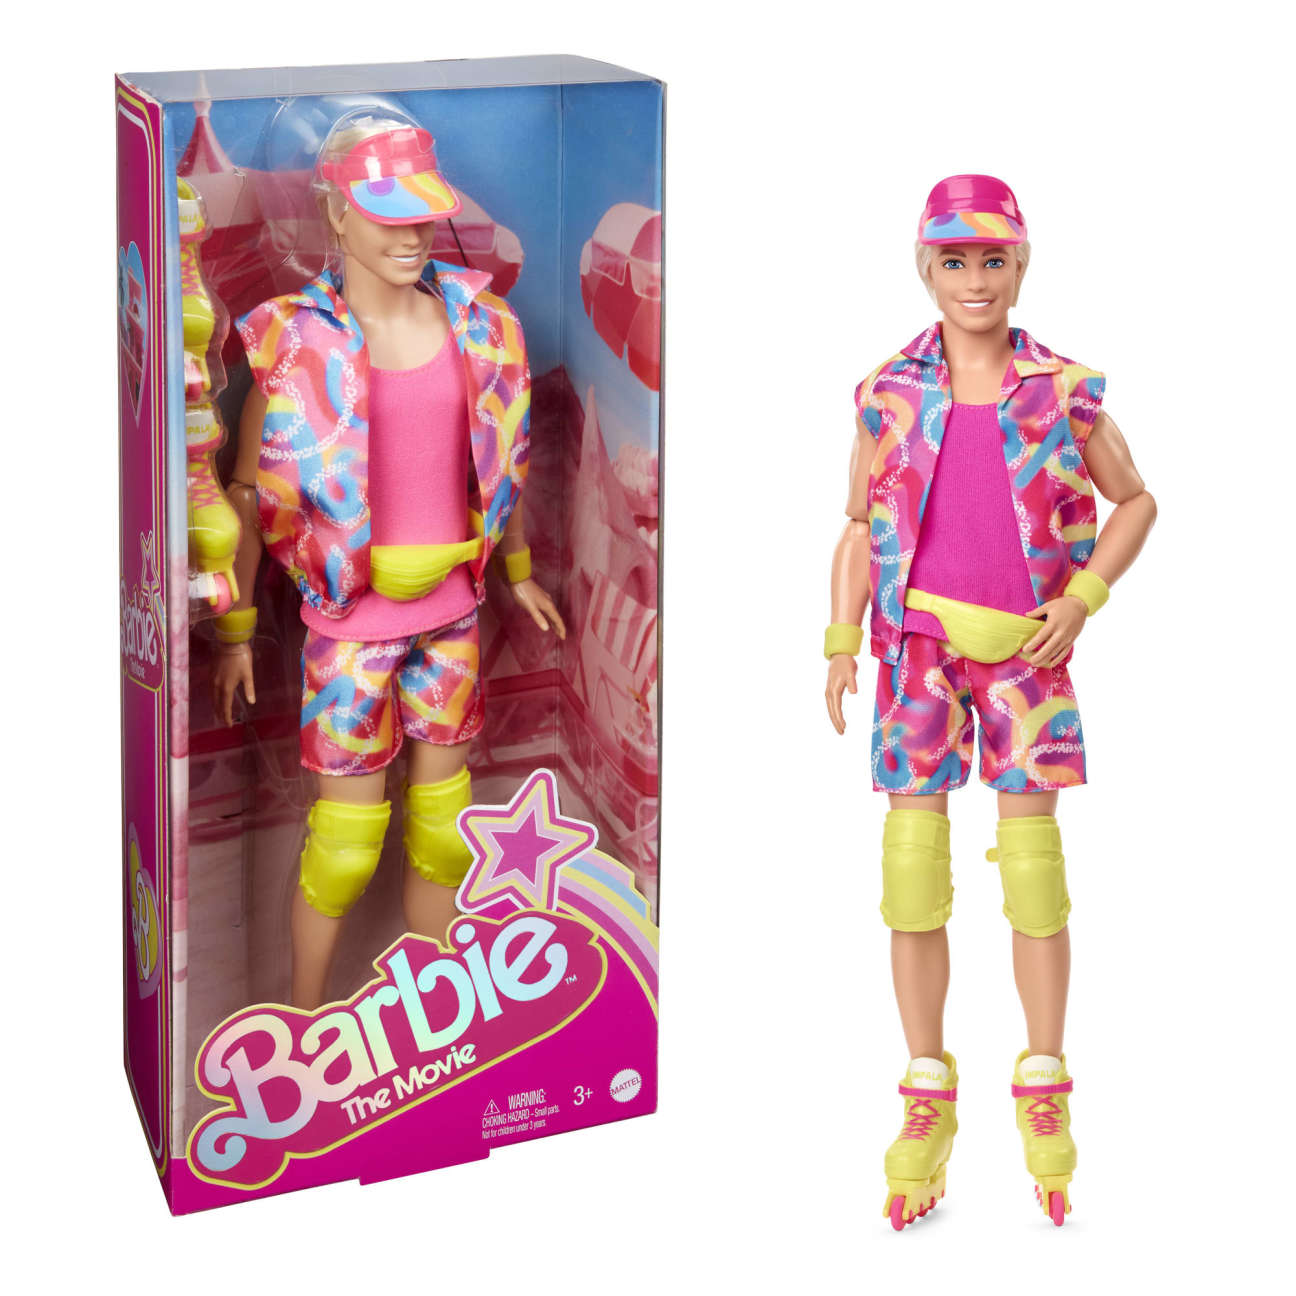 Barbie the Movie Collectible Ken Doll In Inline Skating Outfit - Dolls and Accessories